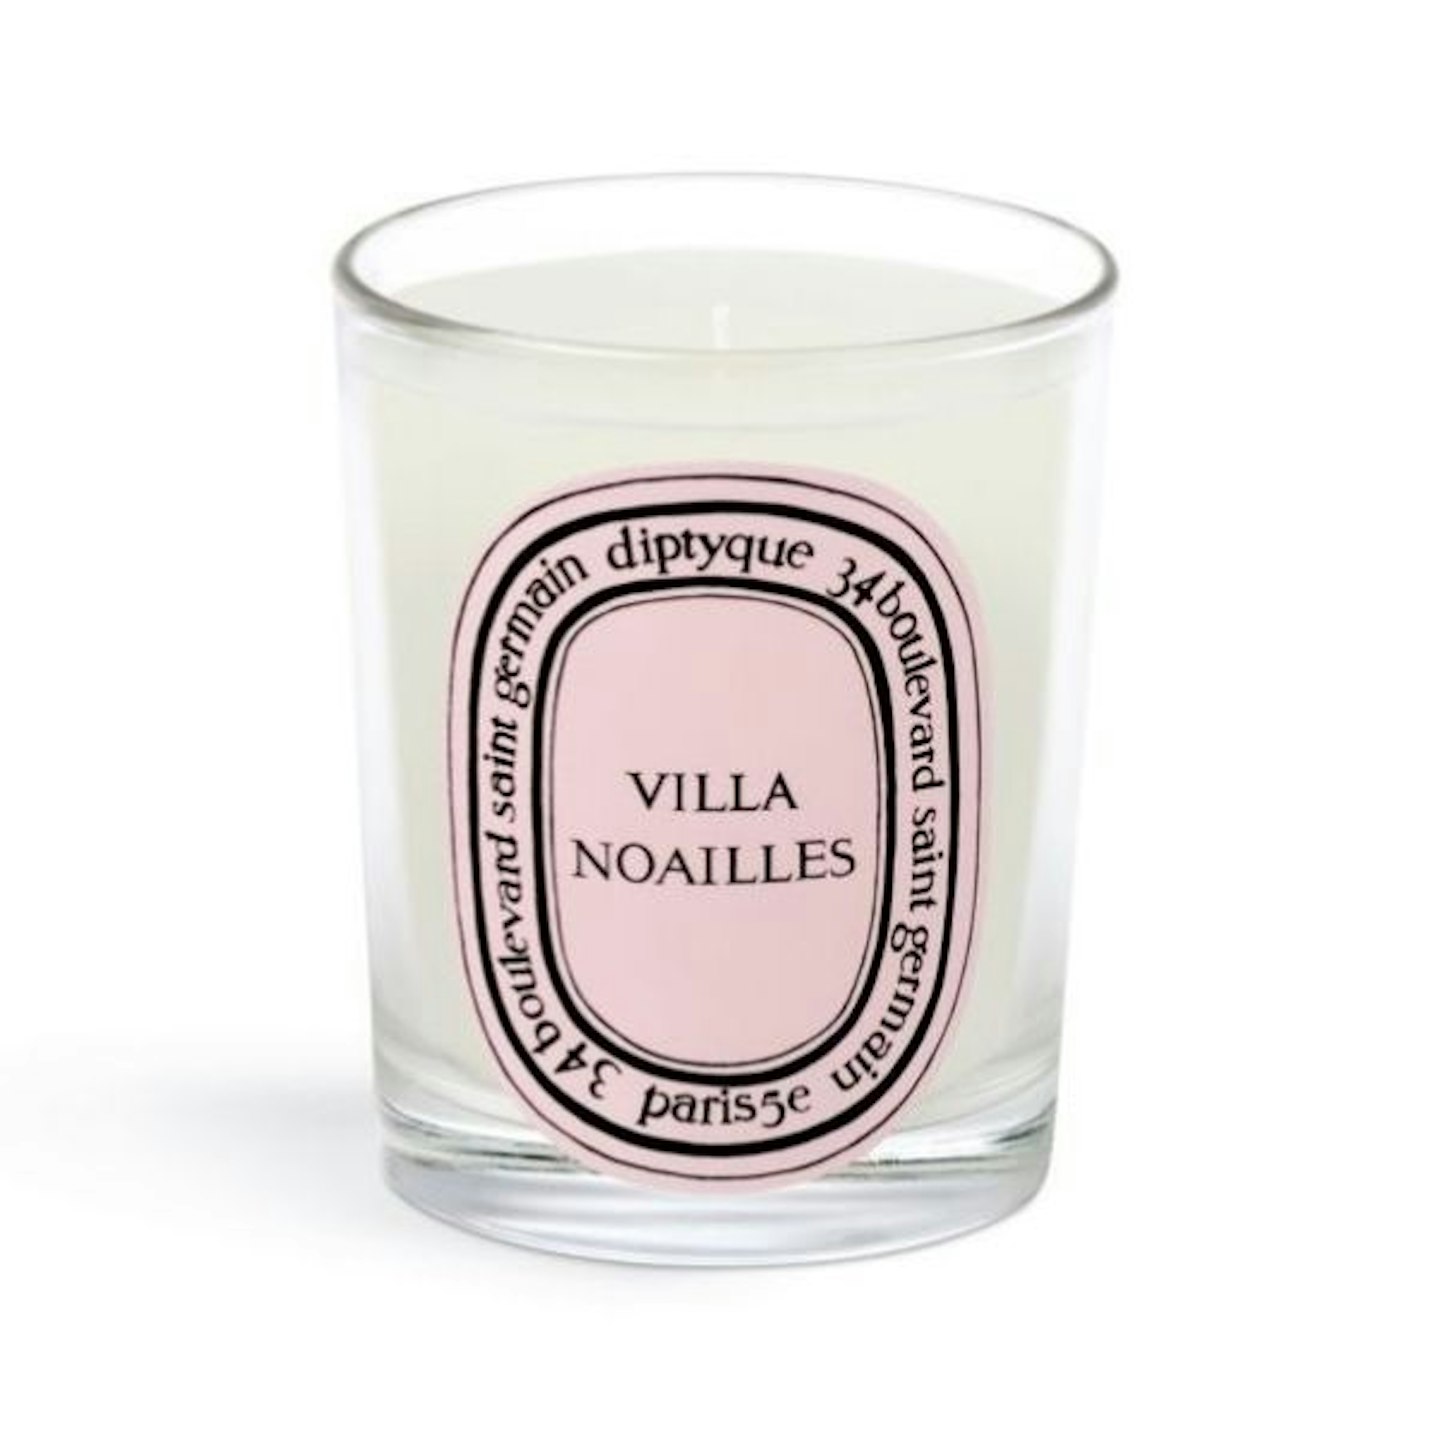 Limited Edition Lilas (Lilac) Candle, 190g